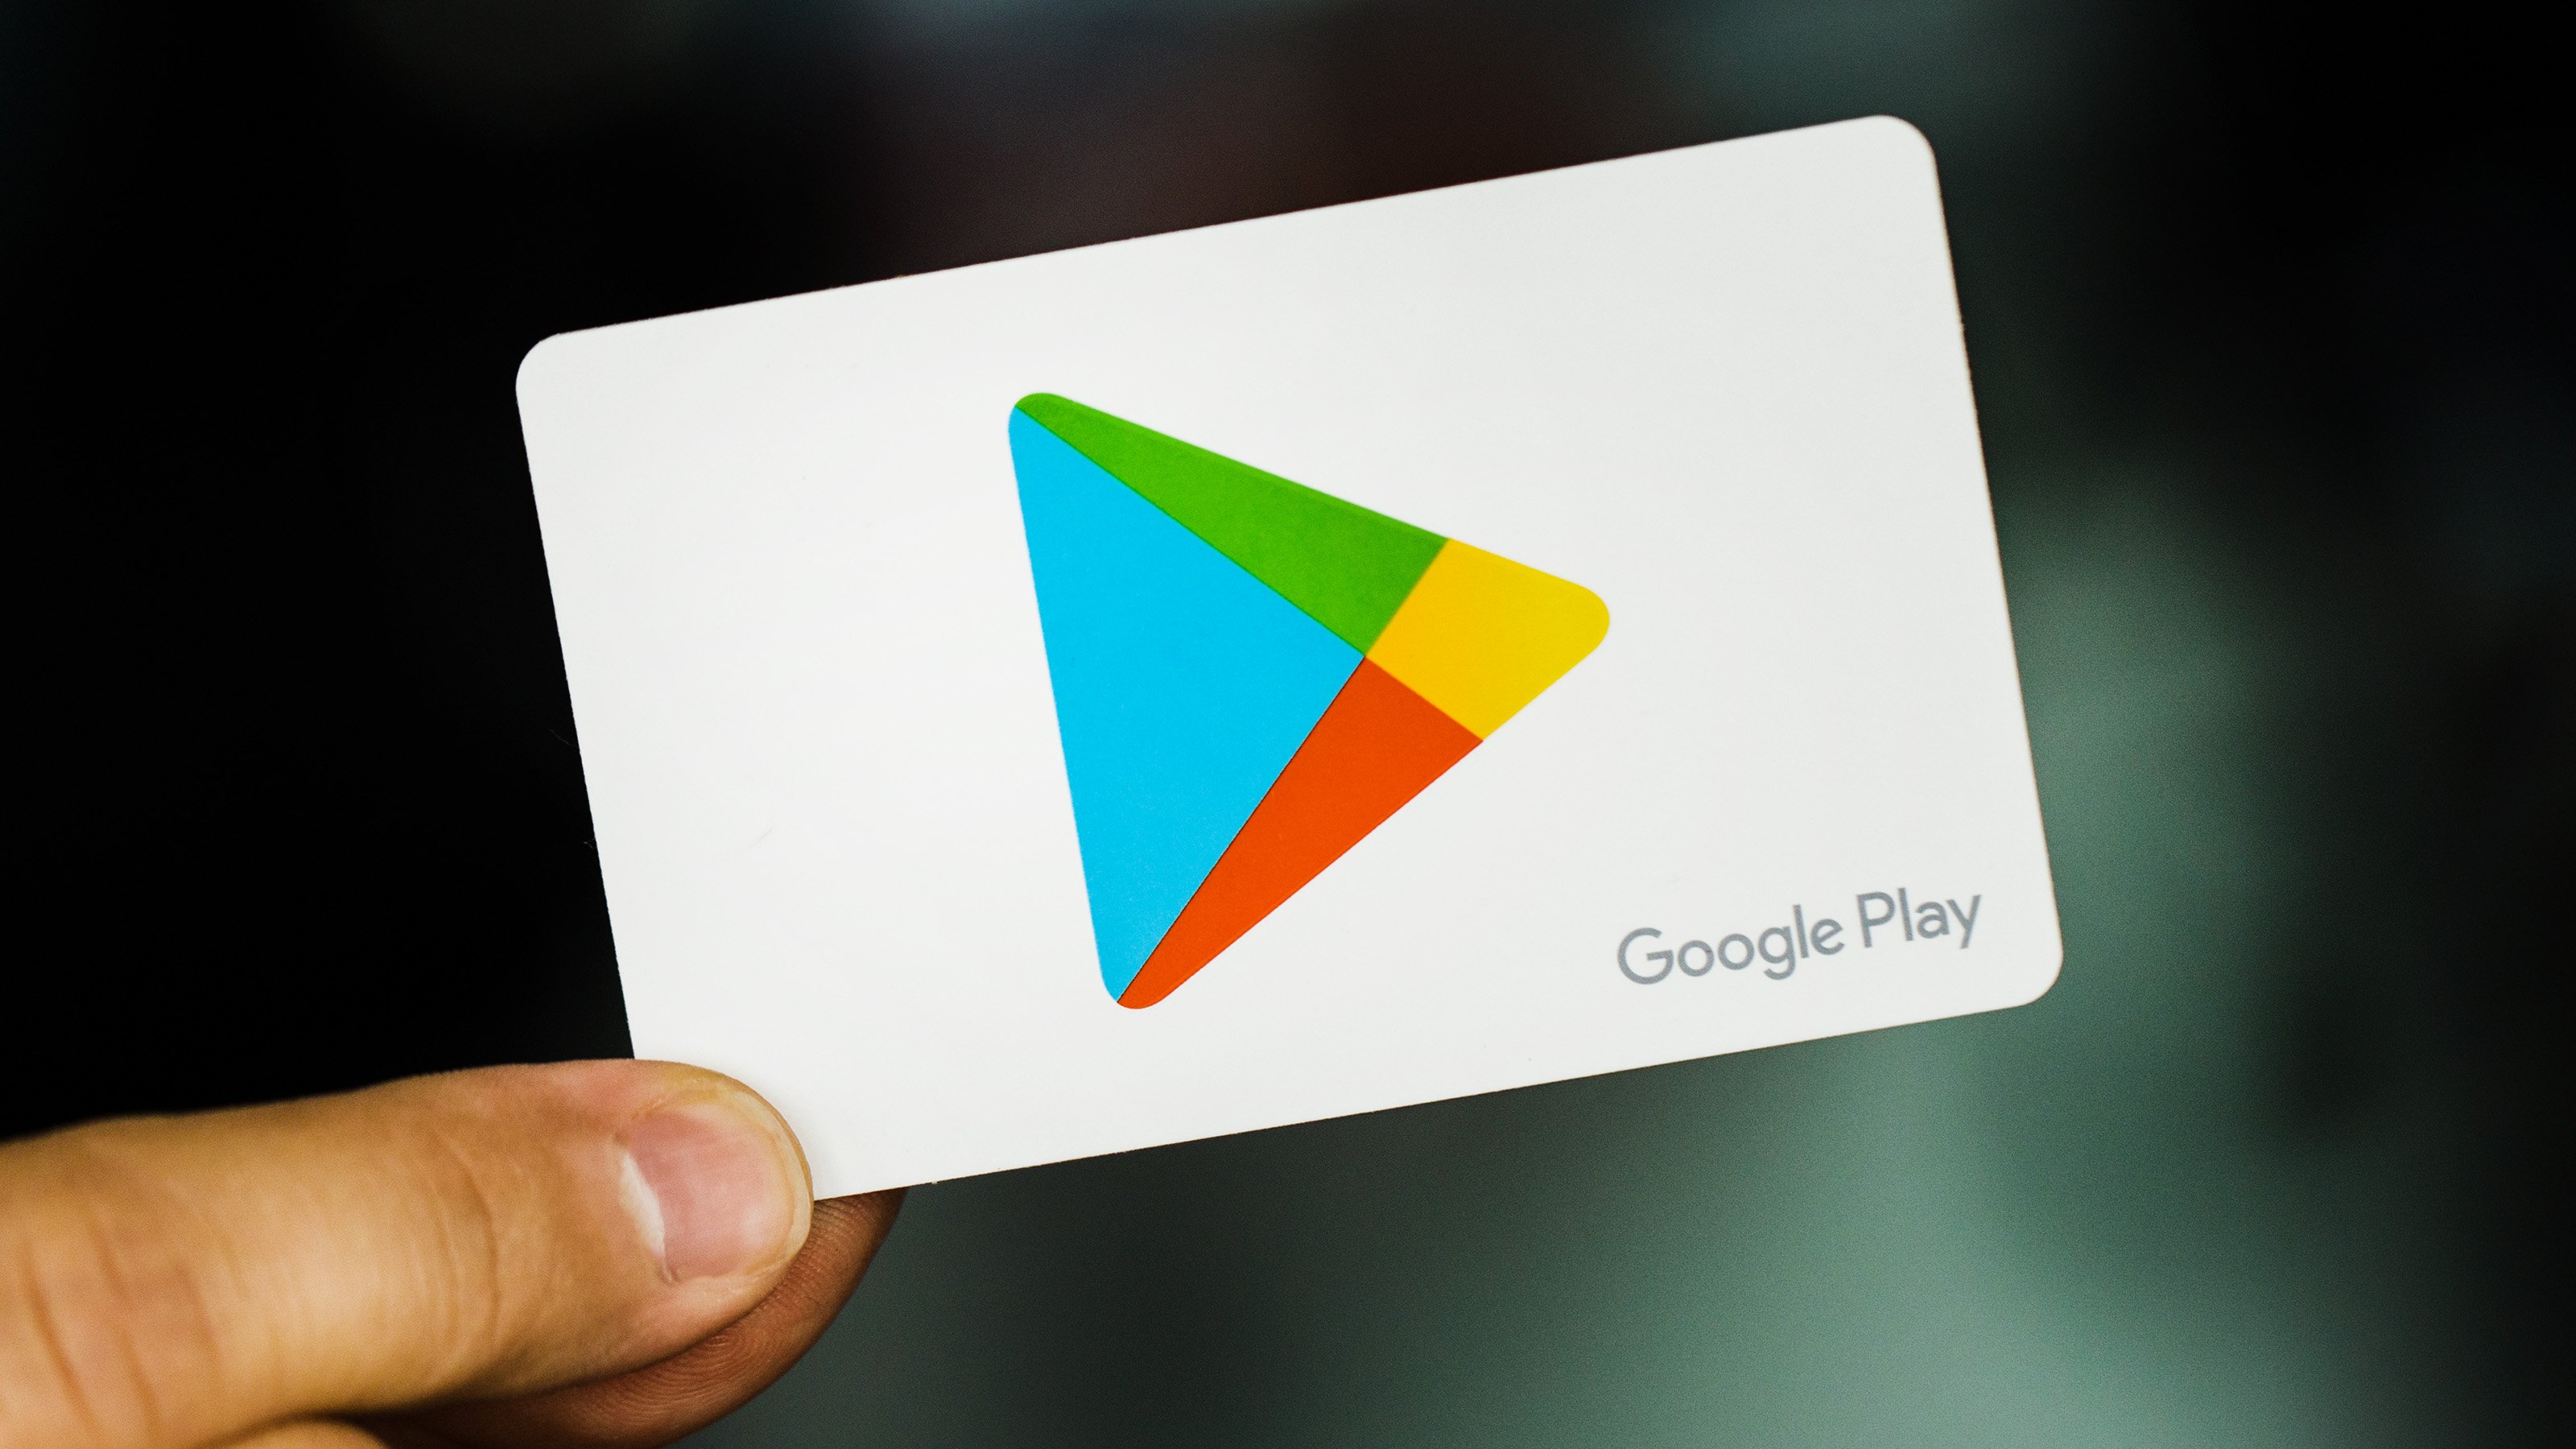 Google Play - Download the Best Apps for Android